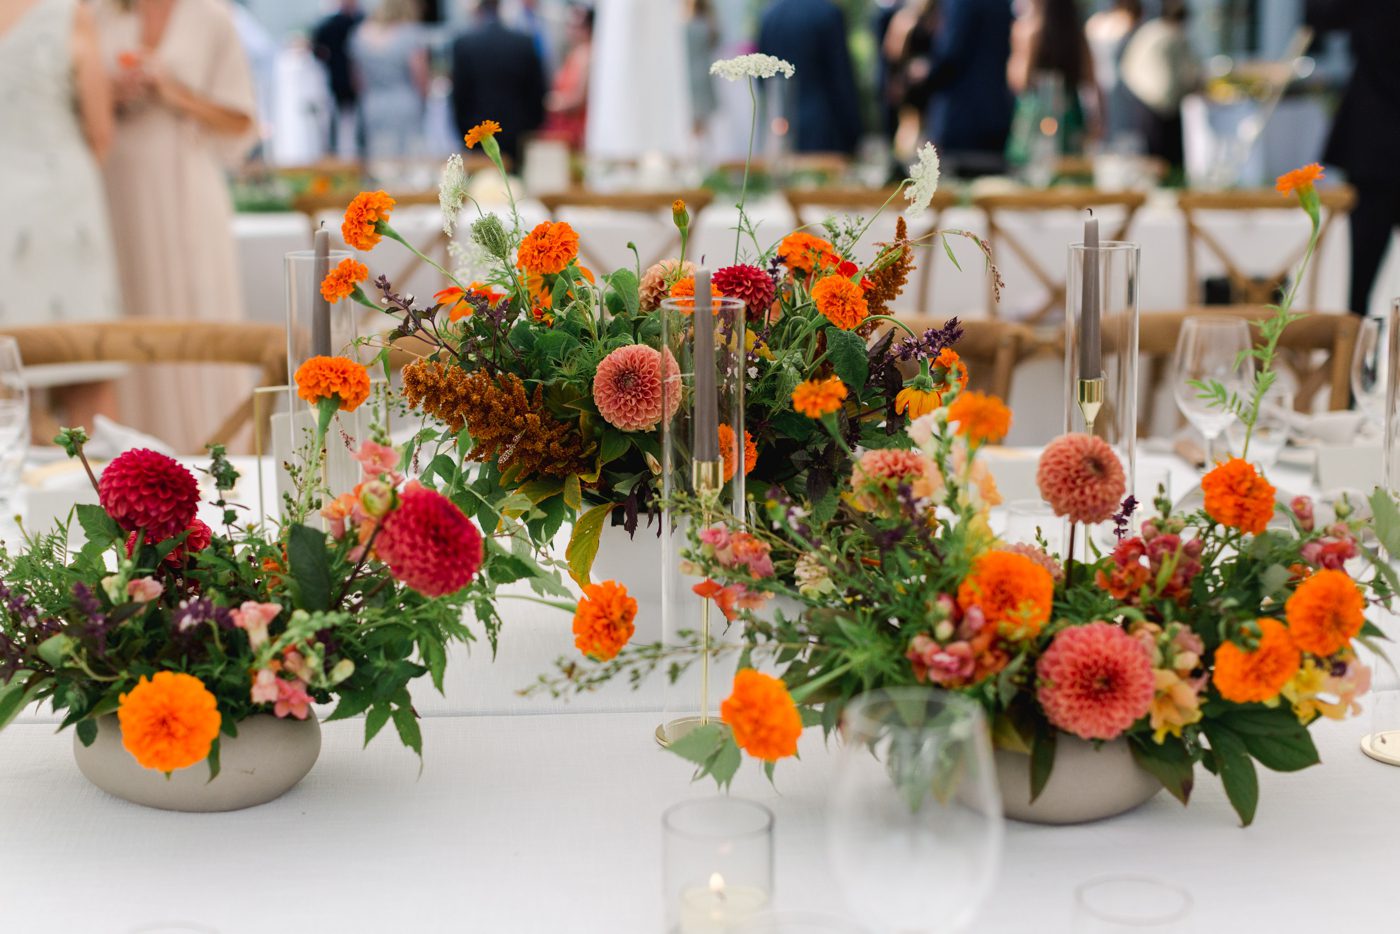 Handpicked flower centerpieces by Wild Blossom Hollow